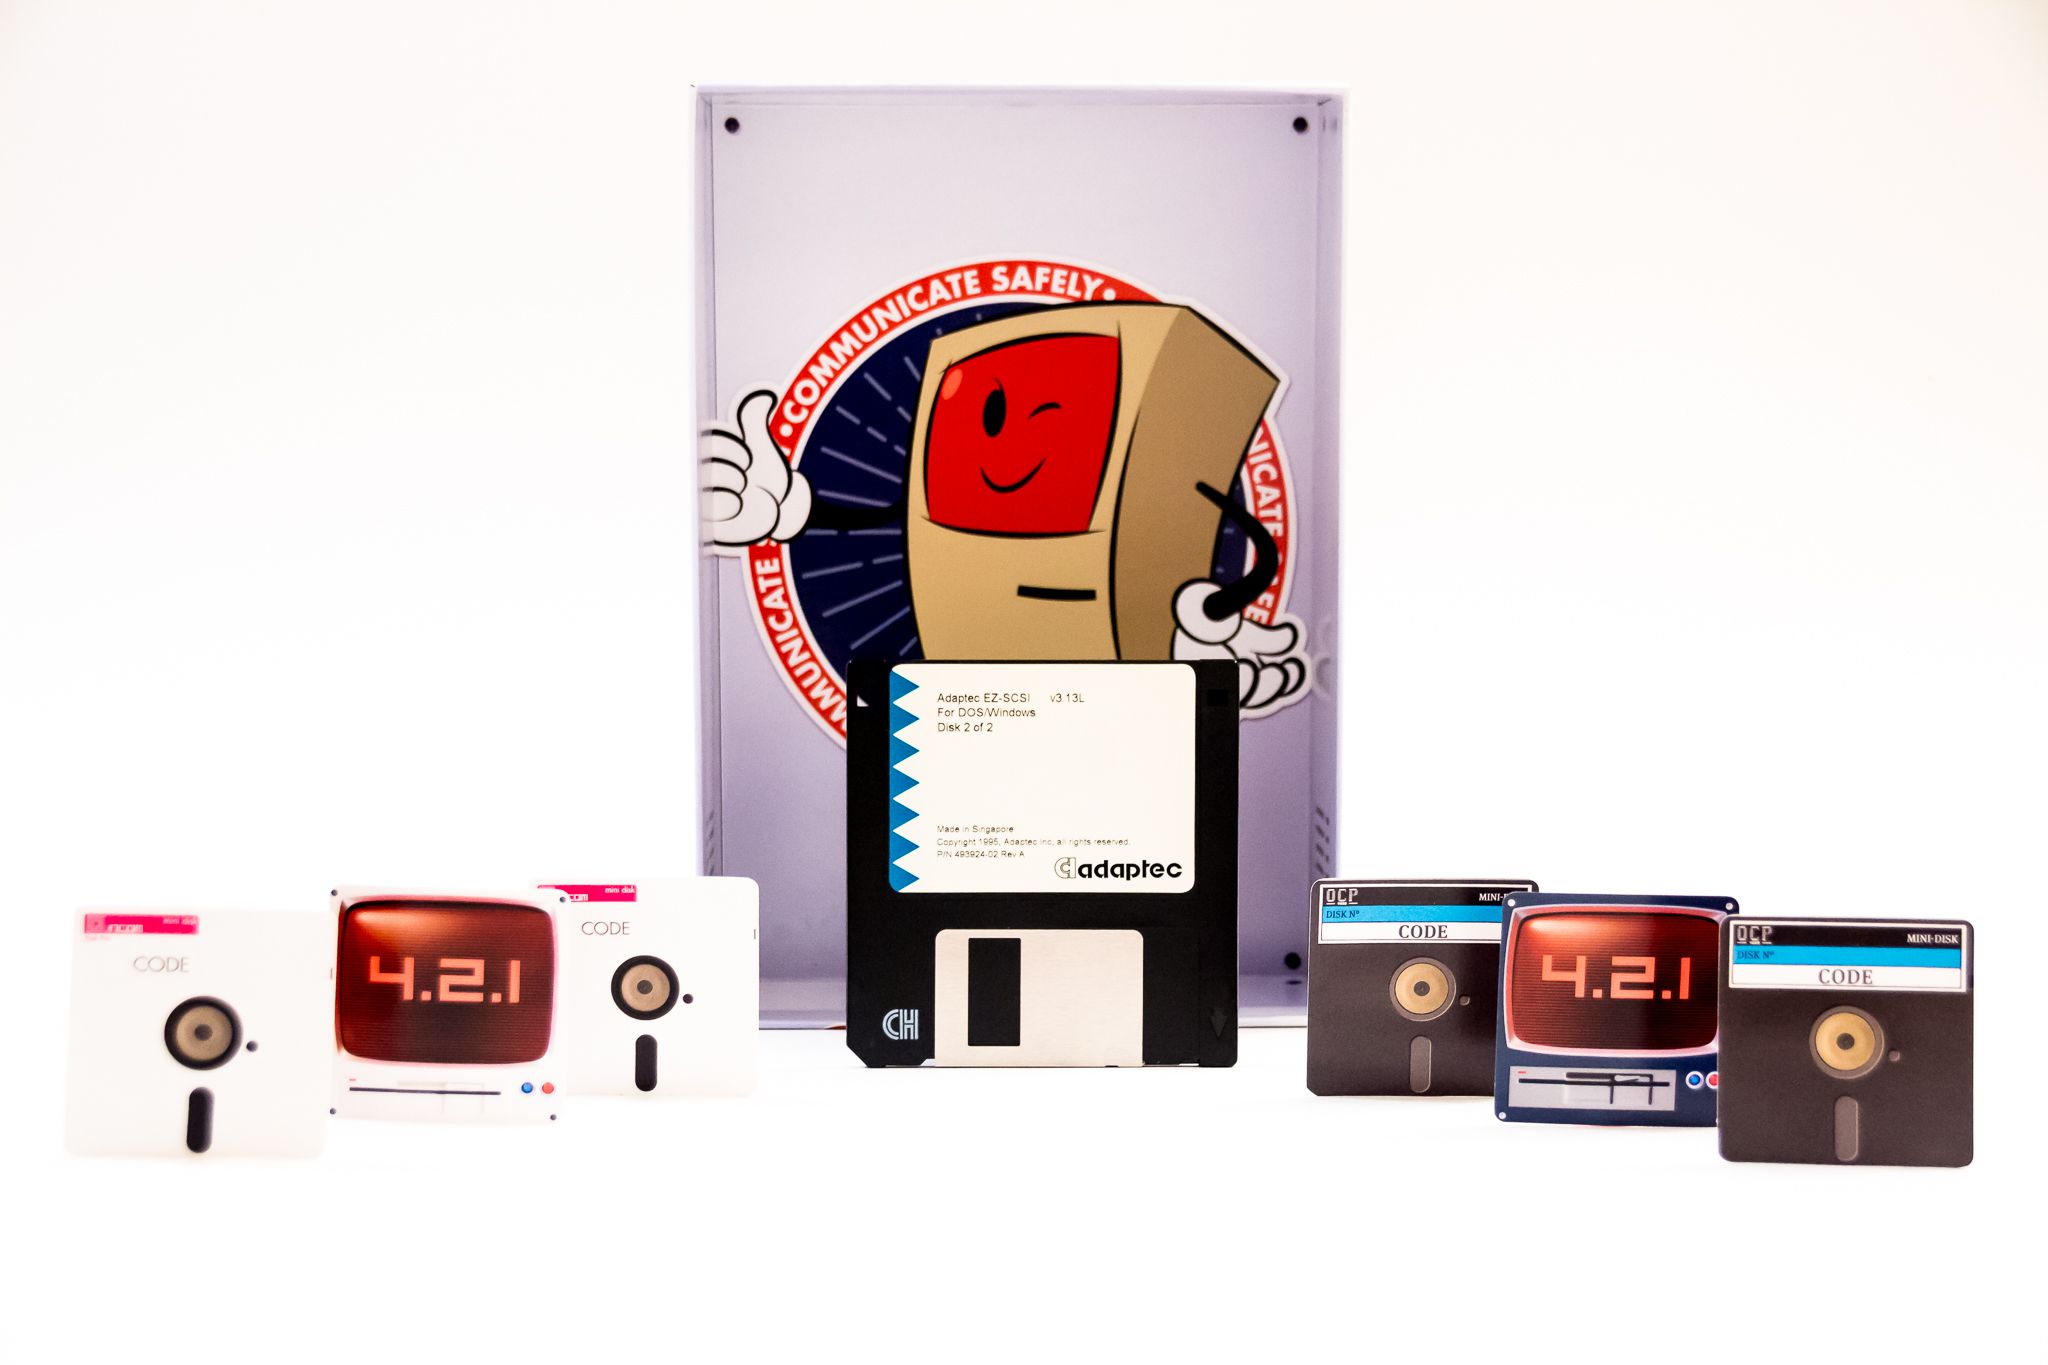 General 2048x1365 board games Decrypto technology floppy disk simple background white background